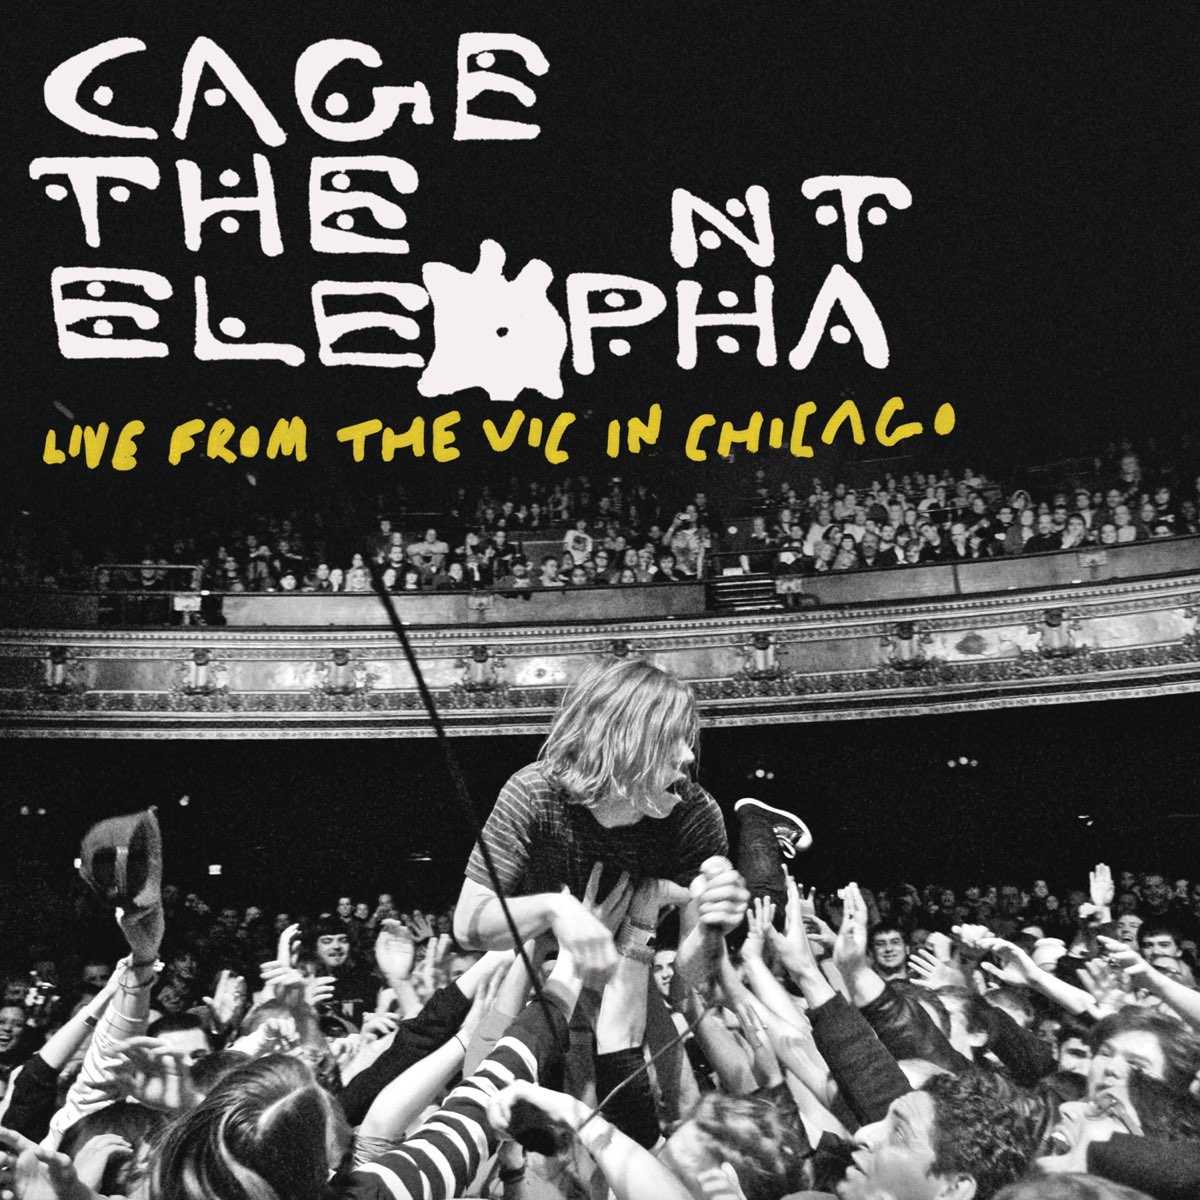 Cage the elephant come. Кейдж зе Элефант. Группа Cage the Elephant. Cage the Elephant солист. Cage the Elephant album.